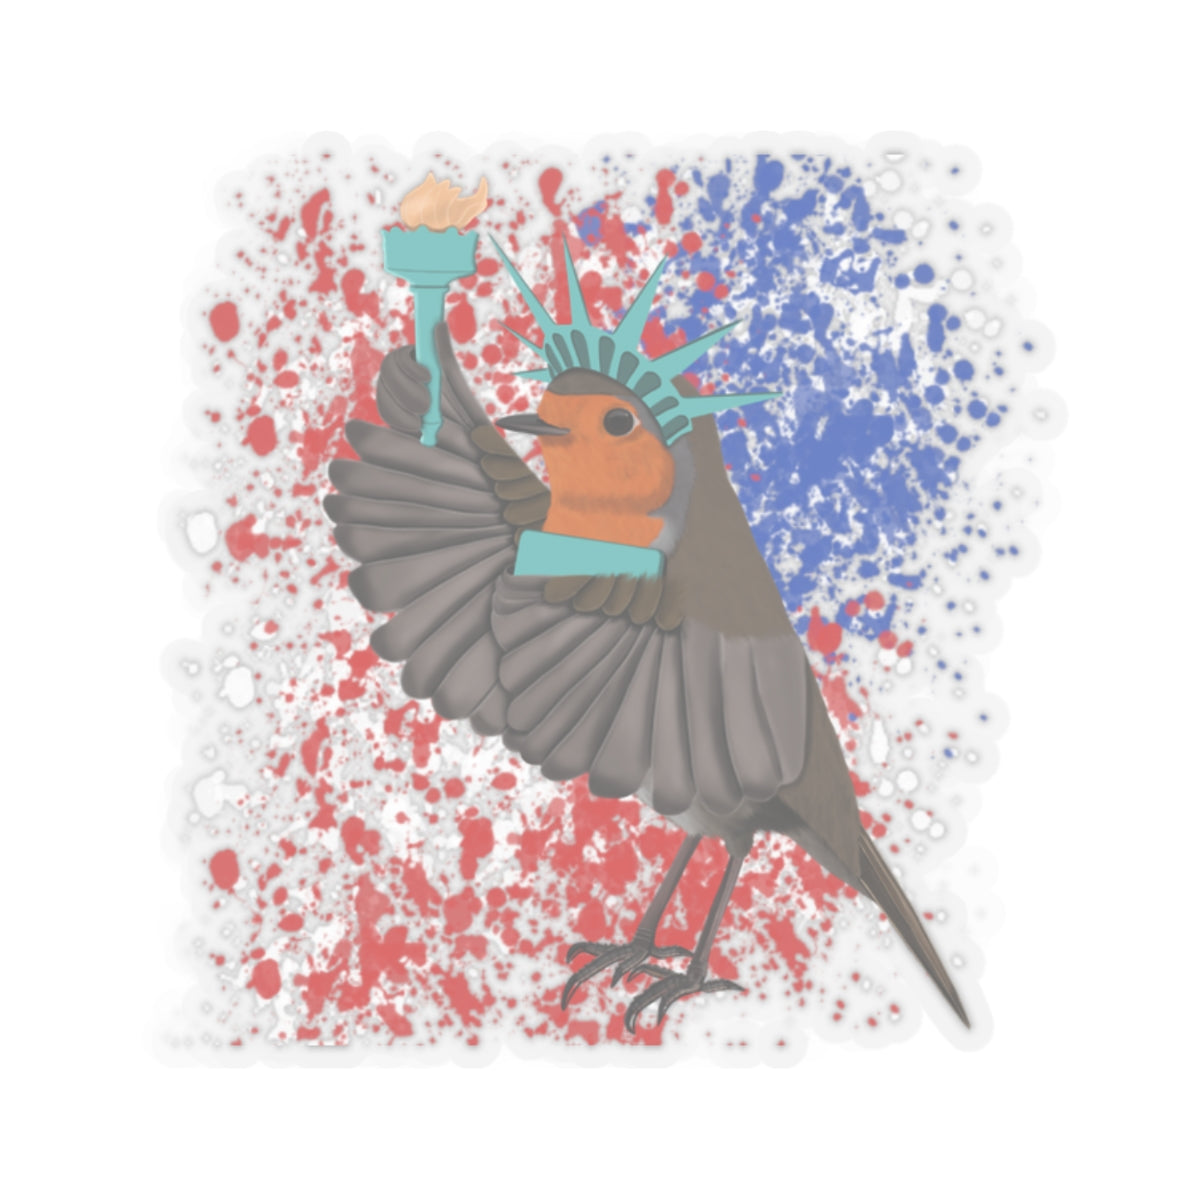 Robin 4th of July Independence Day Statue of Liberty Bird Sticker